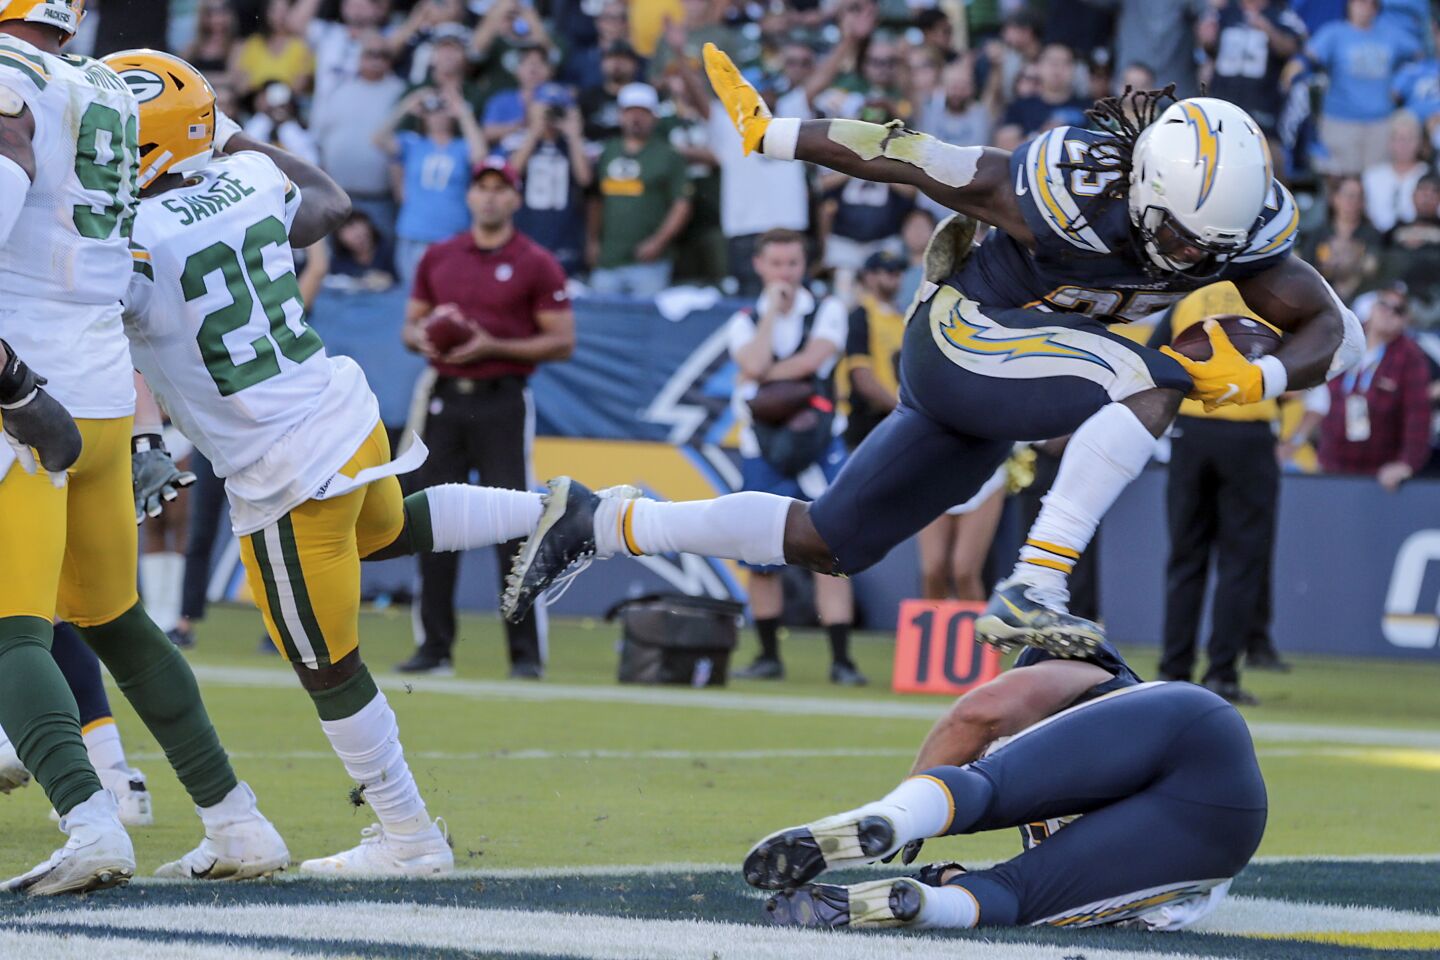 Chargers running back Melvin Gordon leaps into the end zone to score a touchdown.